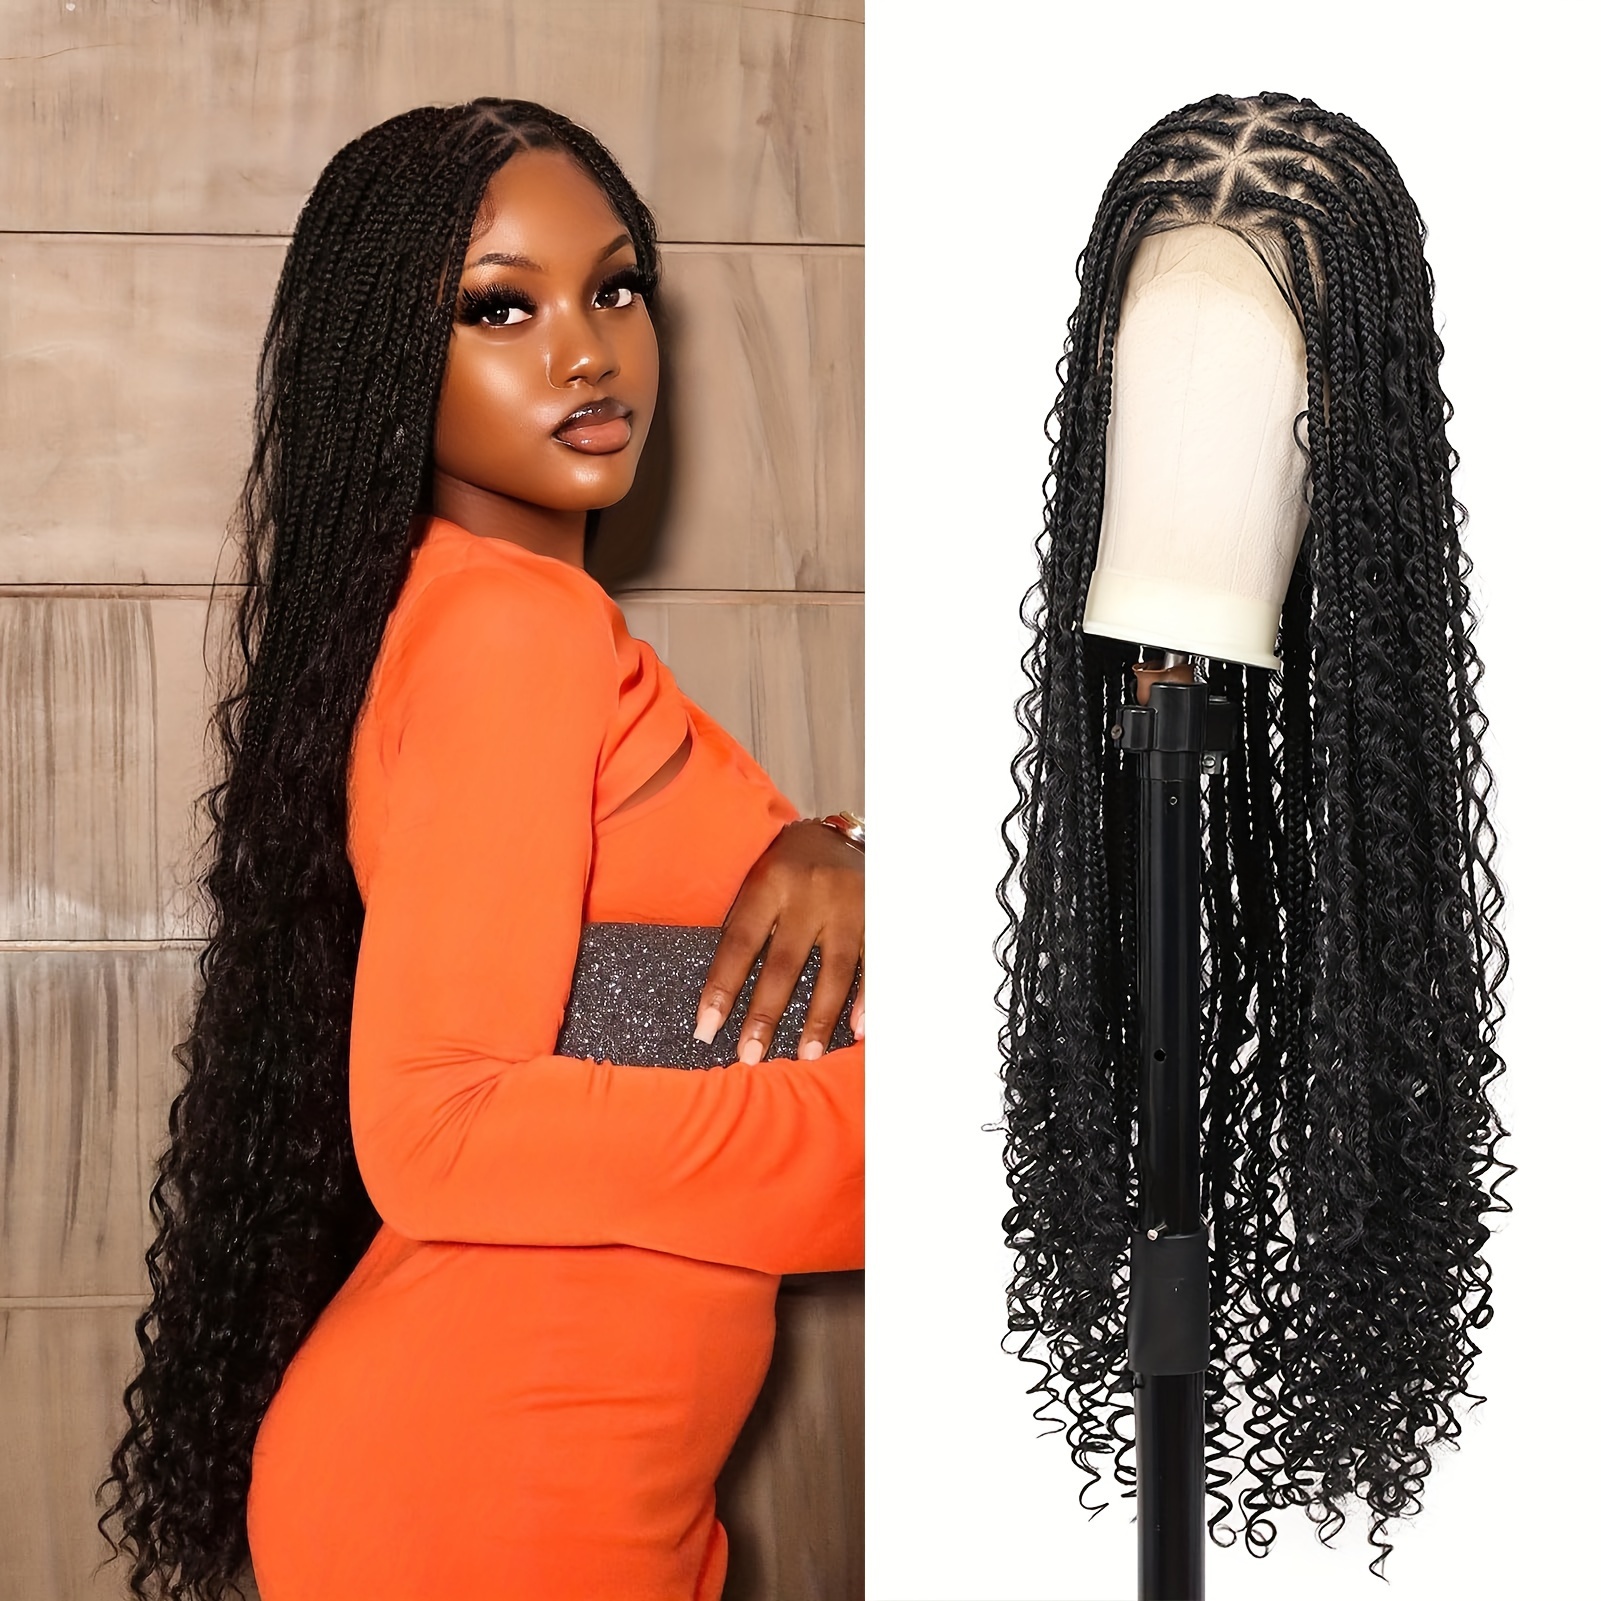 Braided Wigs, Micro box braids wig for black women knotless full lace  front passion twist faux loc dreadlock cornrow wig short braided human hair  wig.